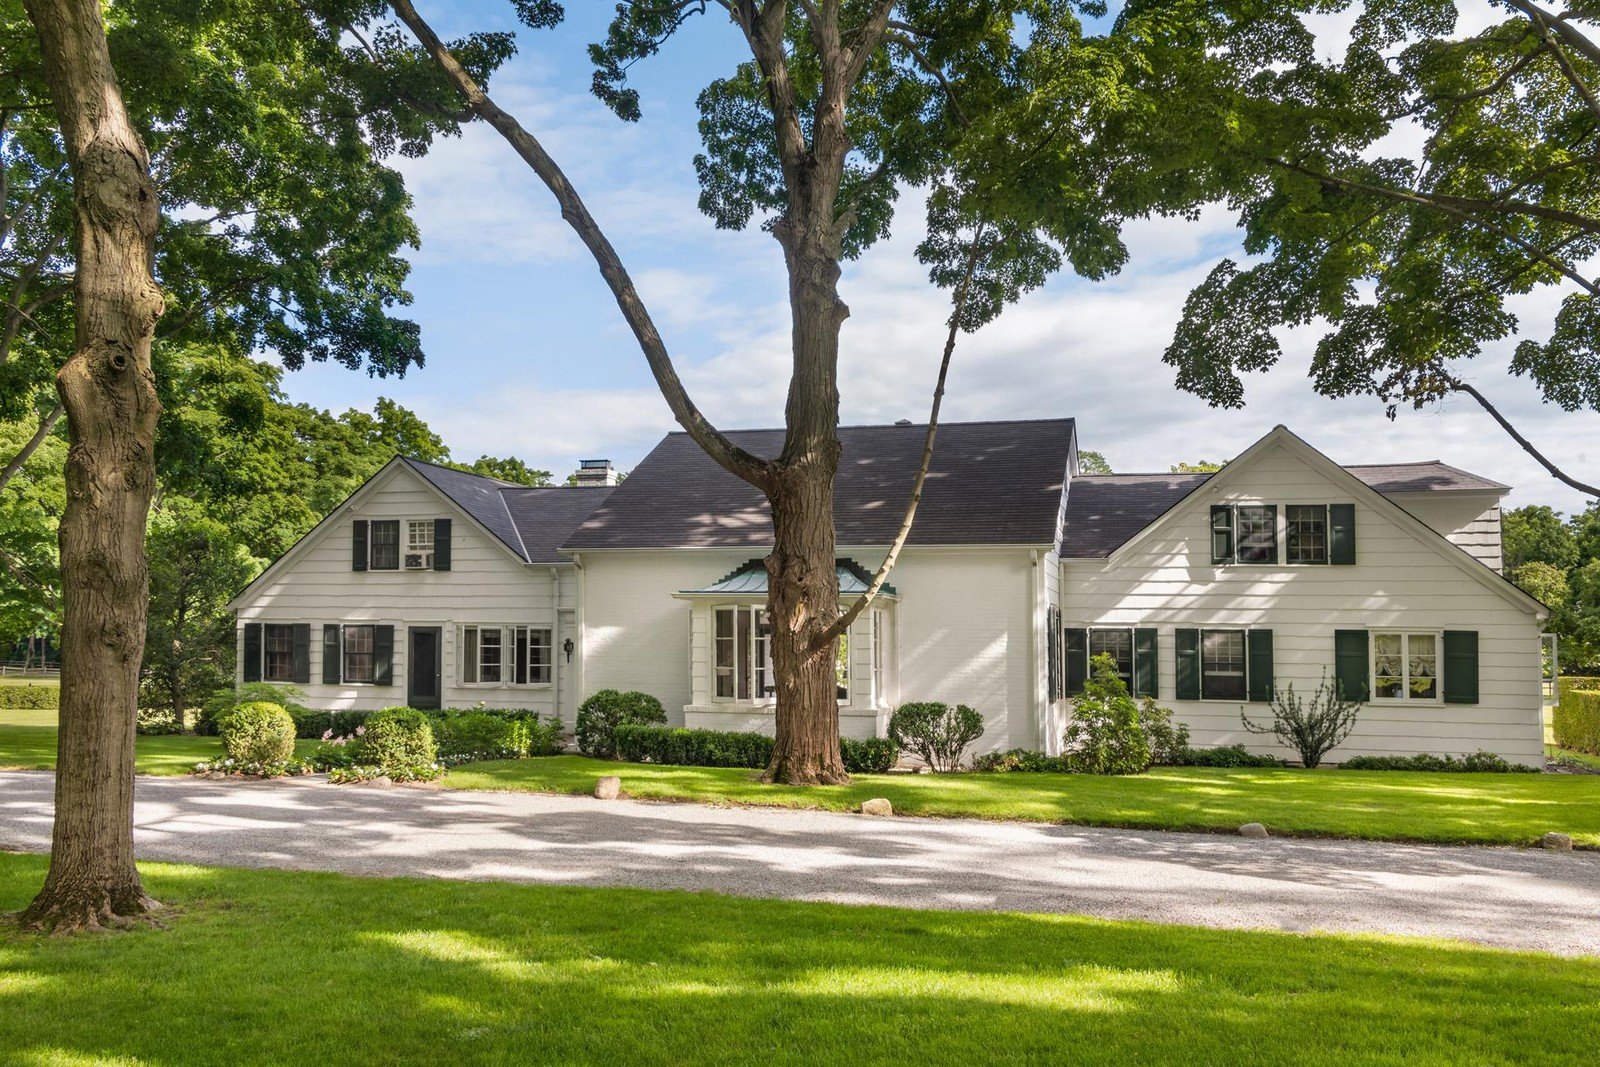 Francis York Gold Coast Waterfront Estate in Locust Valley, NY 11.jpeg